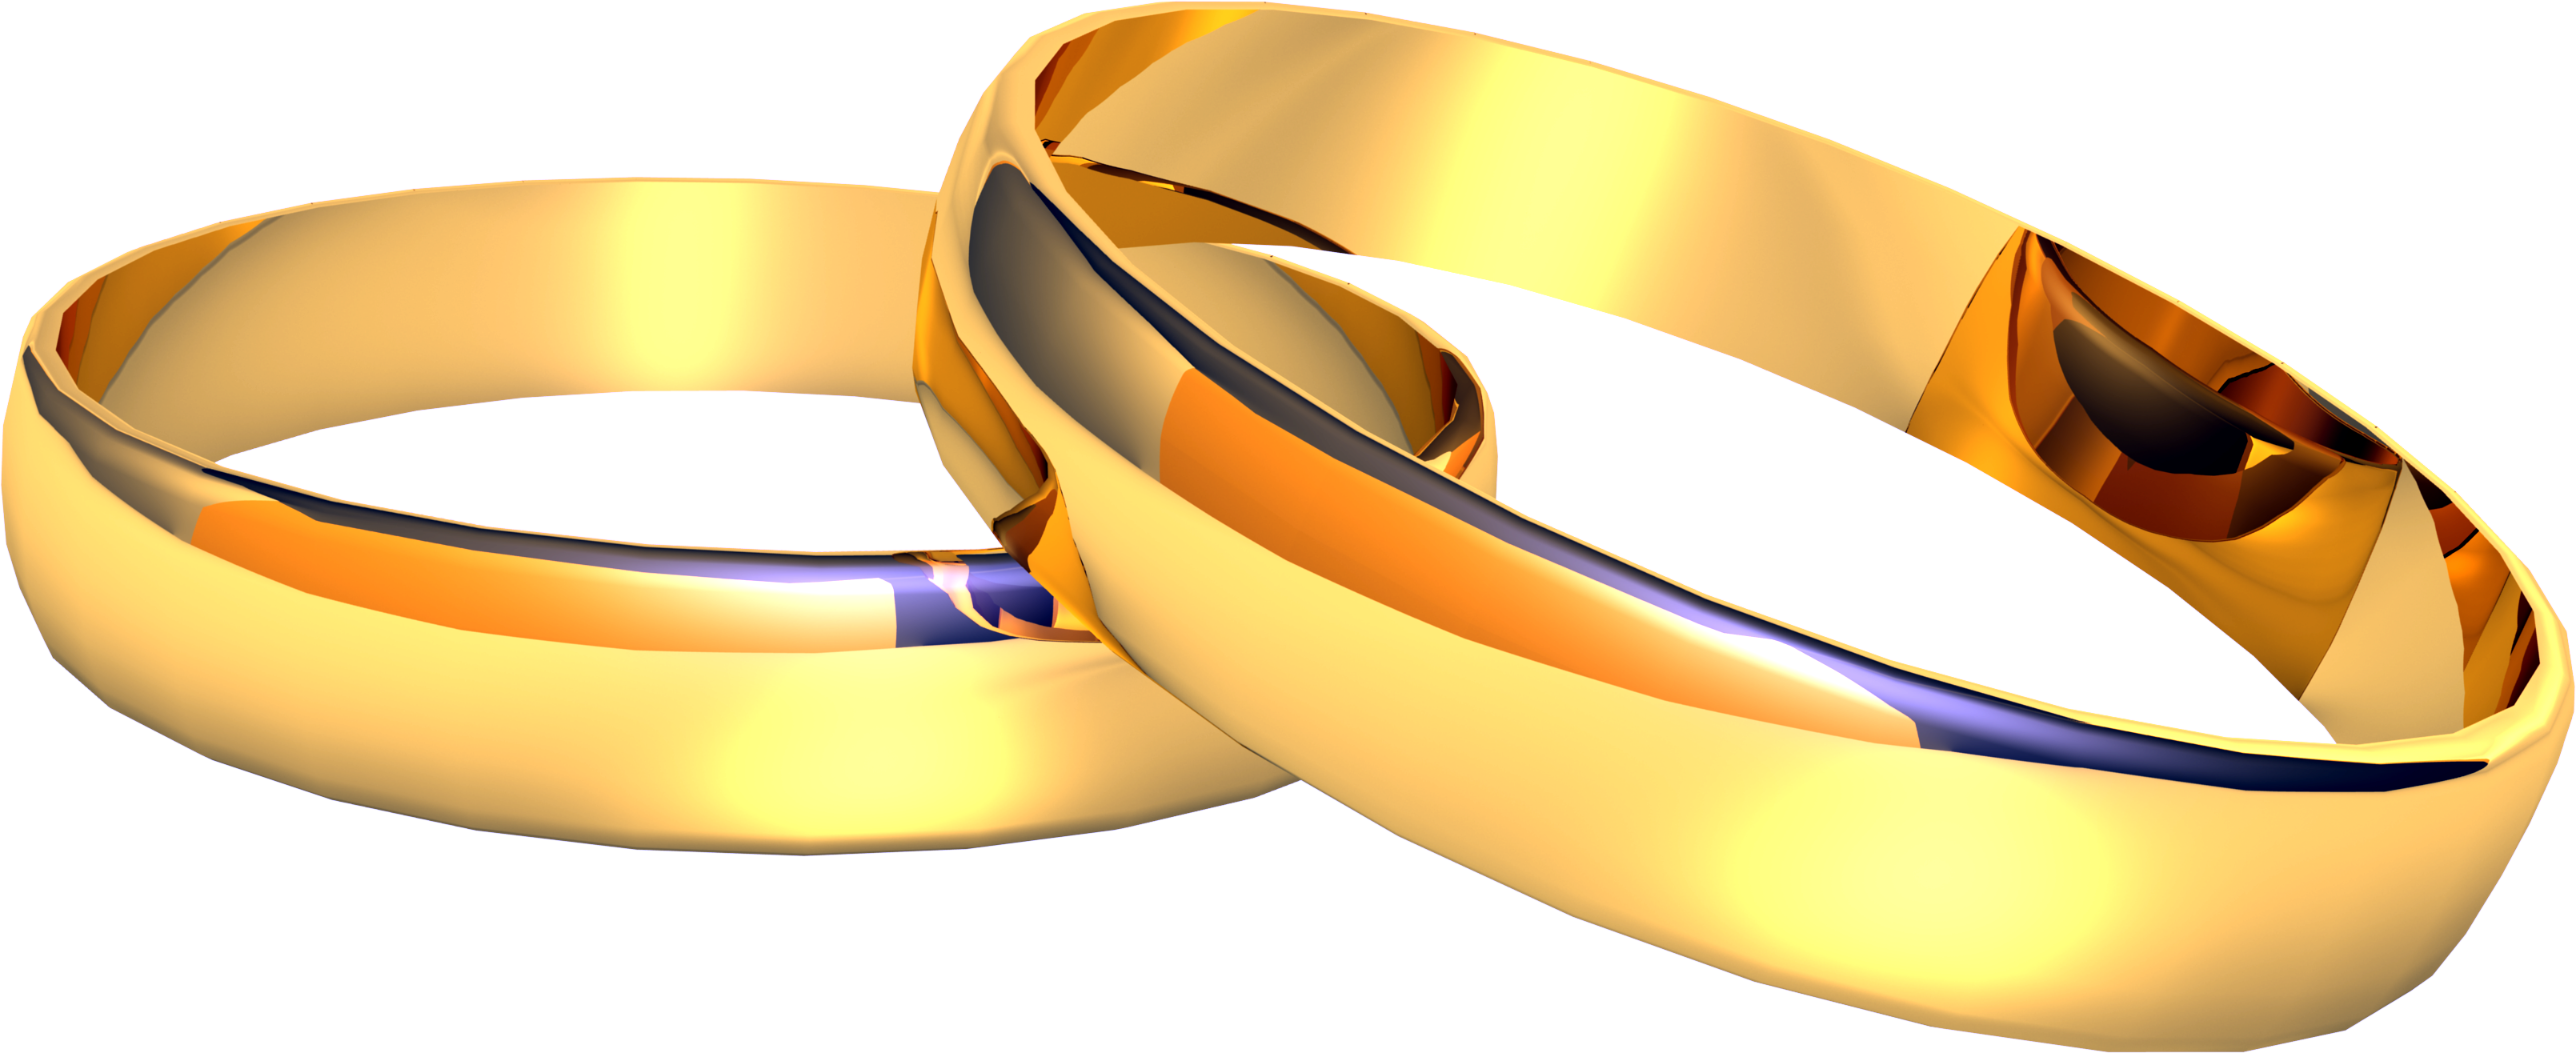 Golden rings PNG image